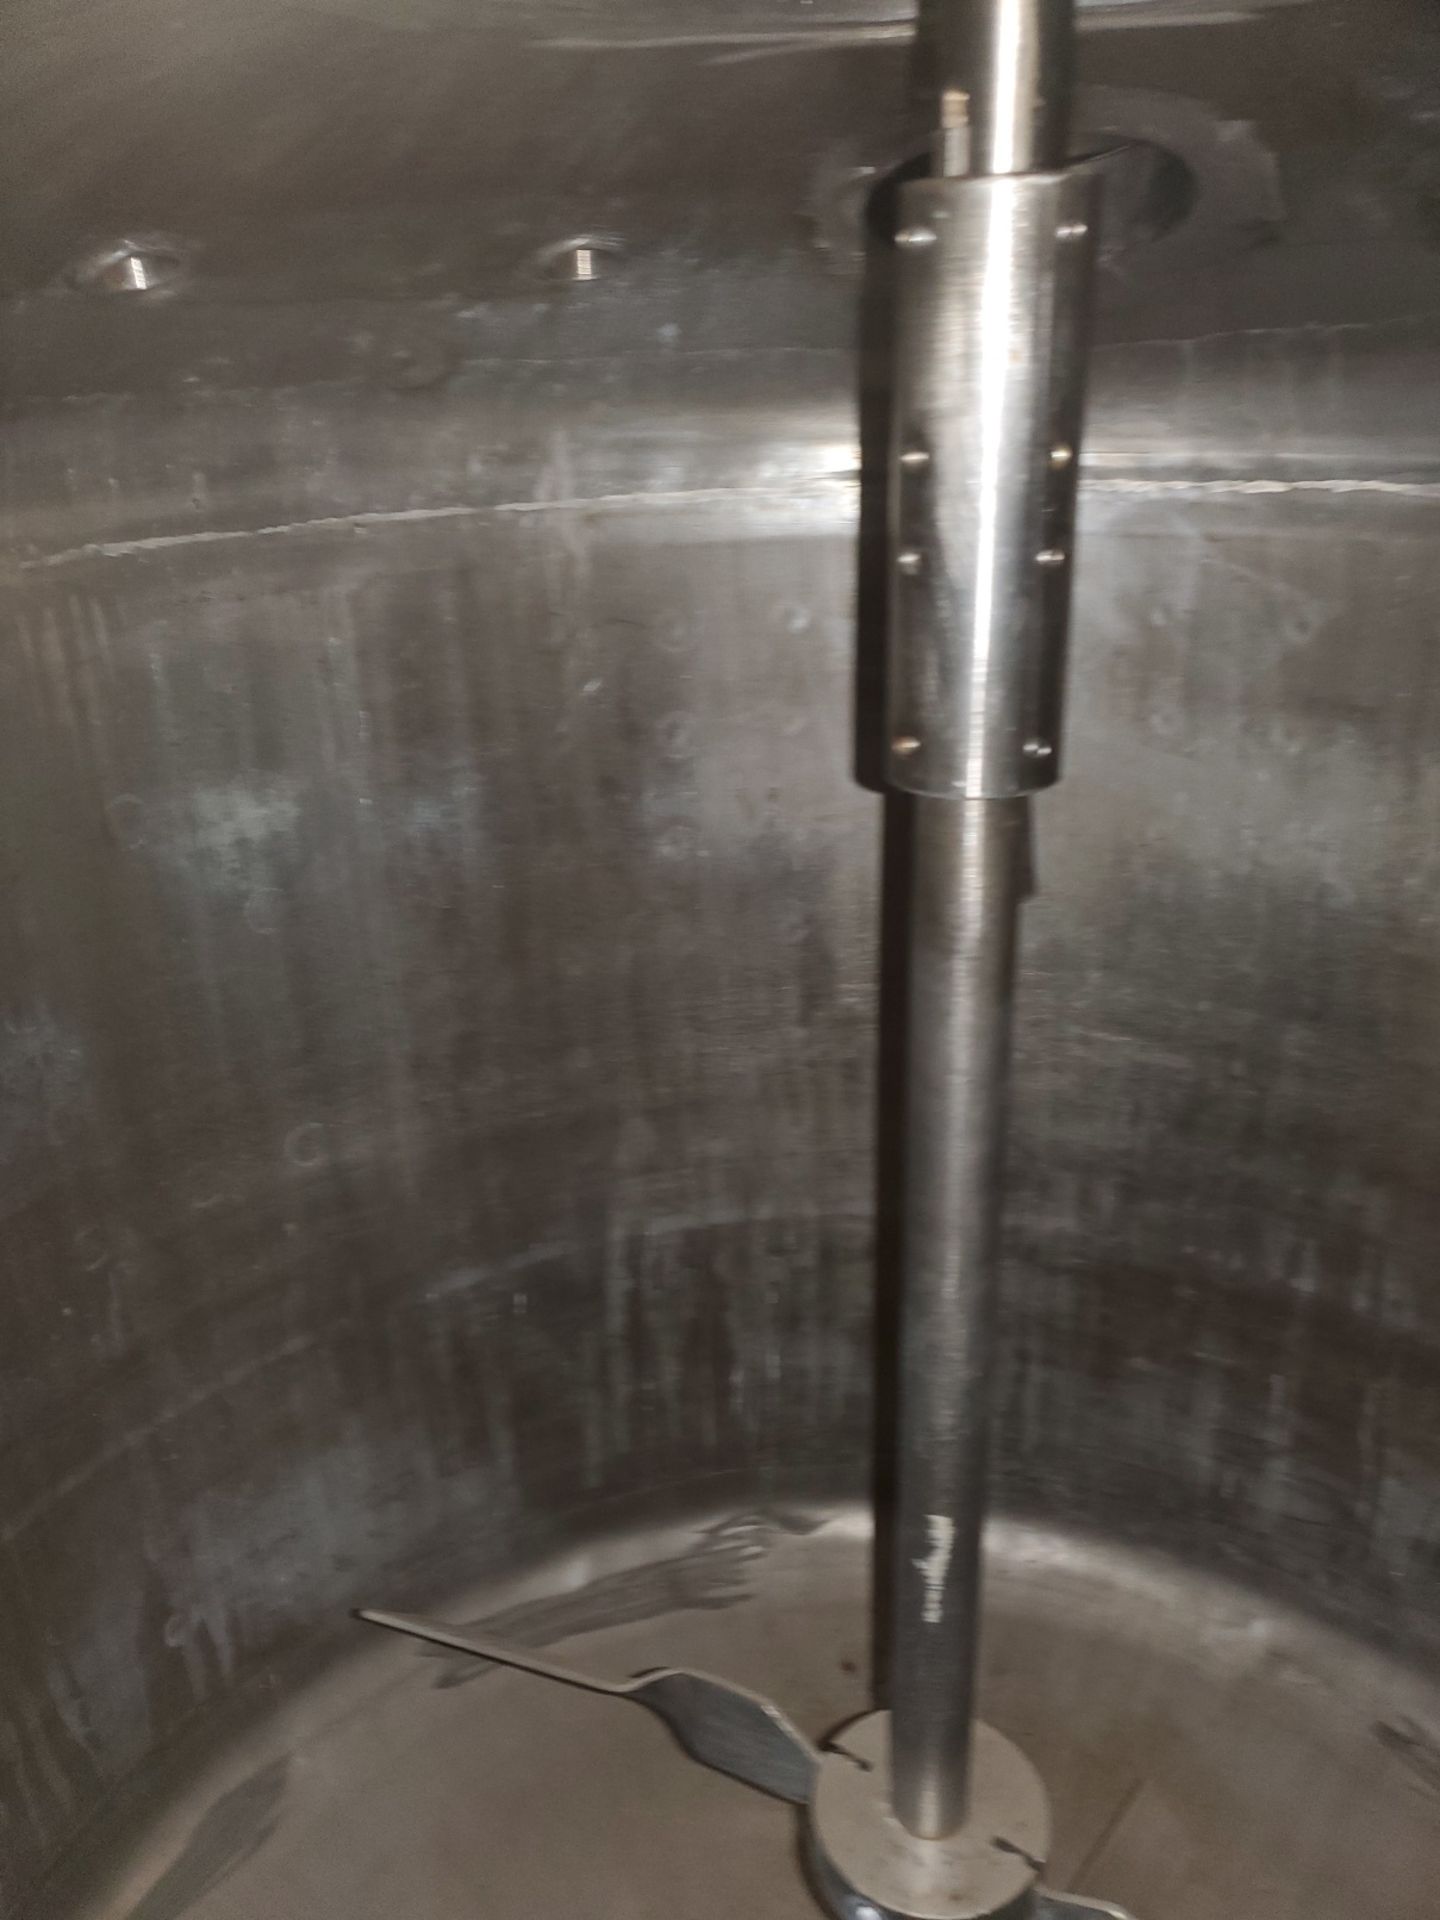 Jacketed Stainless Steel Tank, Agitated, approximately 200 Gallons - Image 8 of 11